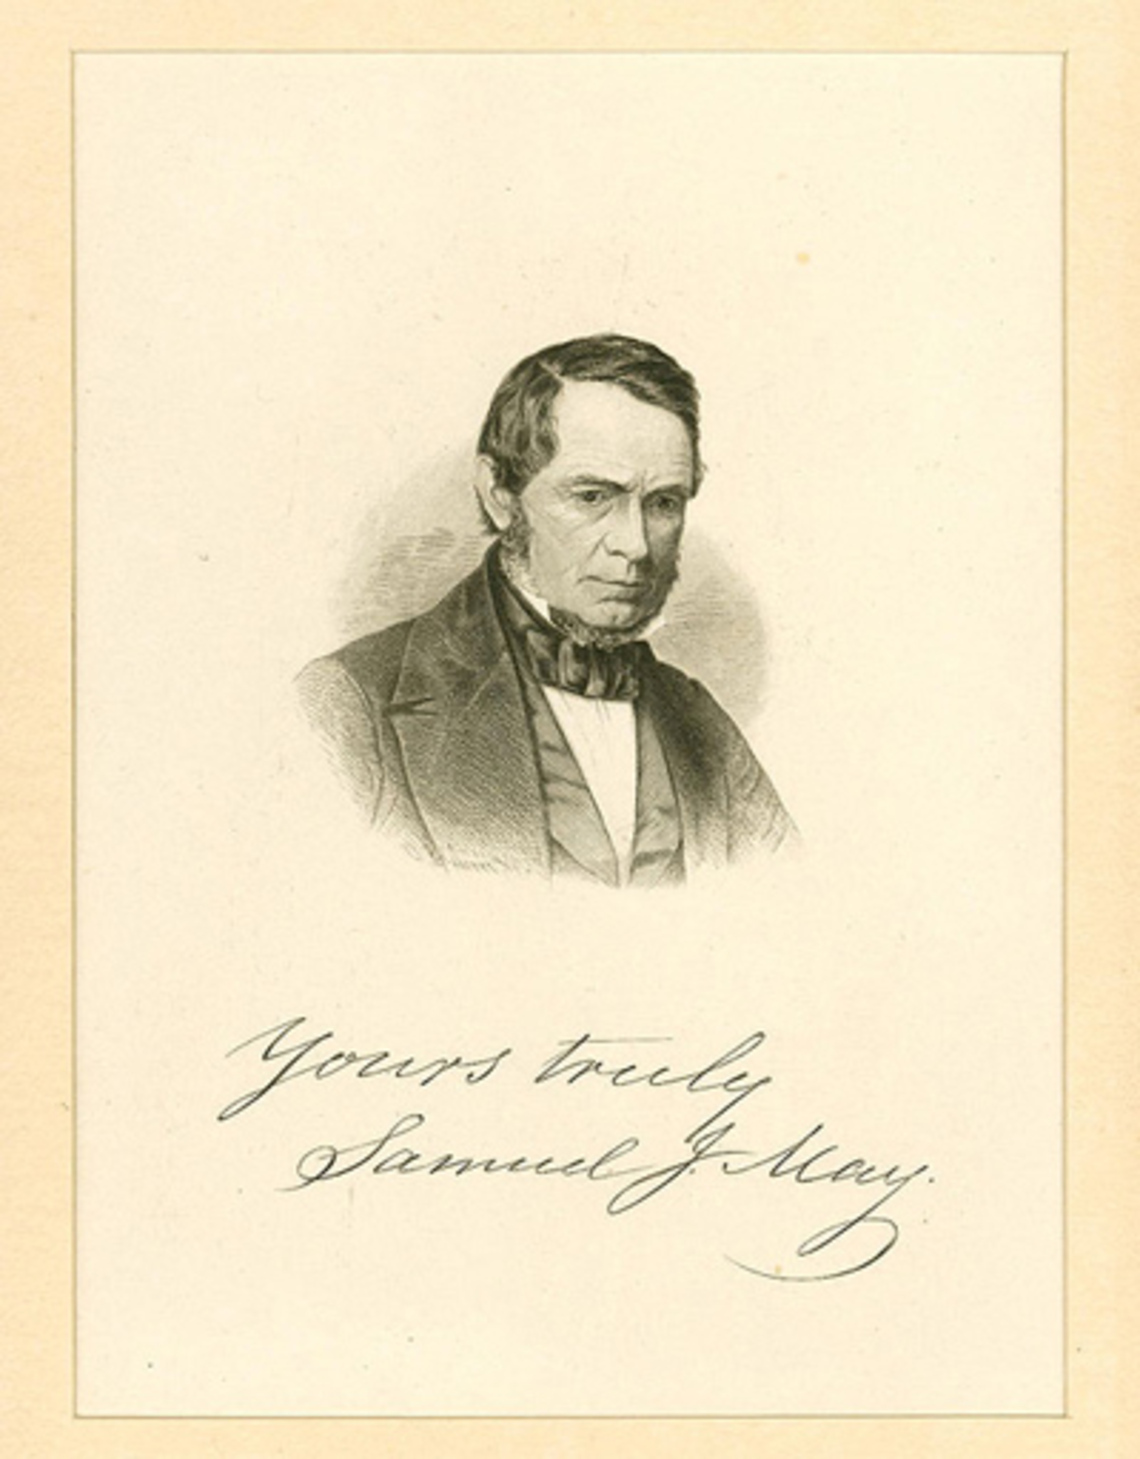 Samuel J. May (1797-1871), the most significant white Garrisonian Abolitionist in Windham County at the time of <em>The Unionist</em>, had a long career as an Abolitionist activist. He eventually donated his library of Anti-Slavery publcations and manuscripts to Cornell University, near his final home in Syracuse. https://rmc.library.cornell.edu/mayantislaverycoll/biography.php